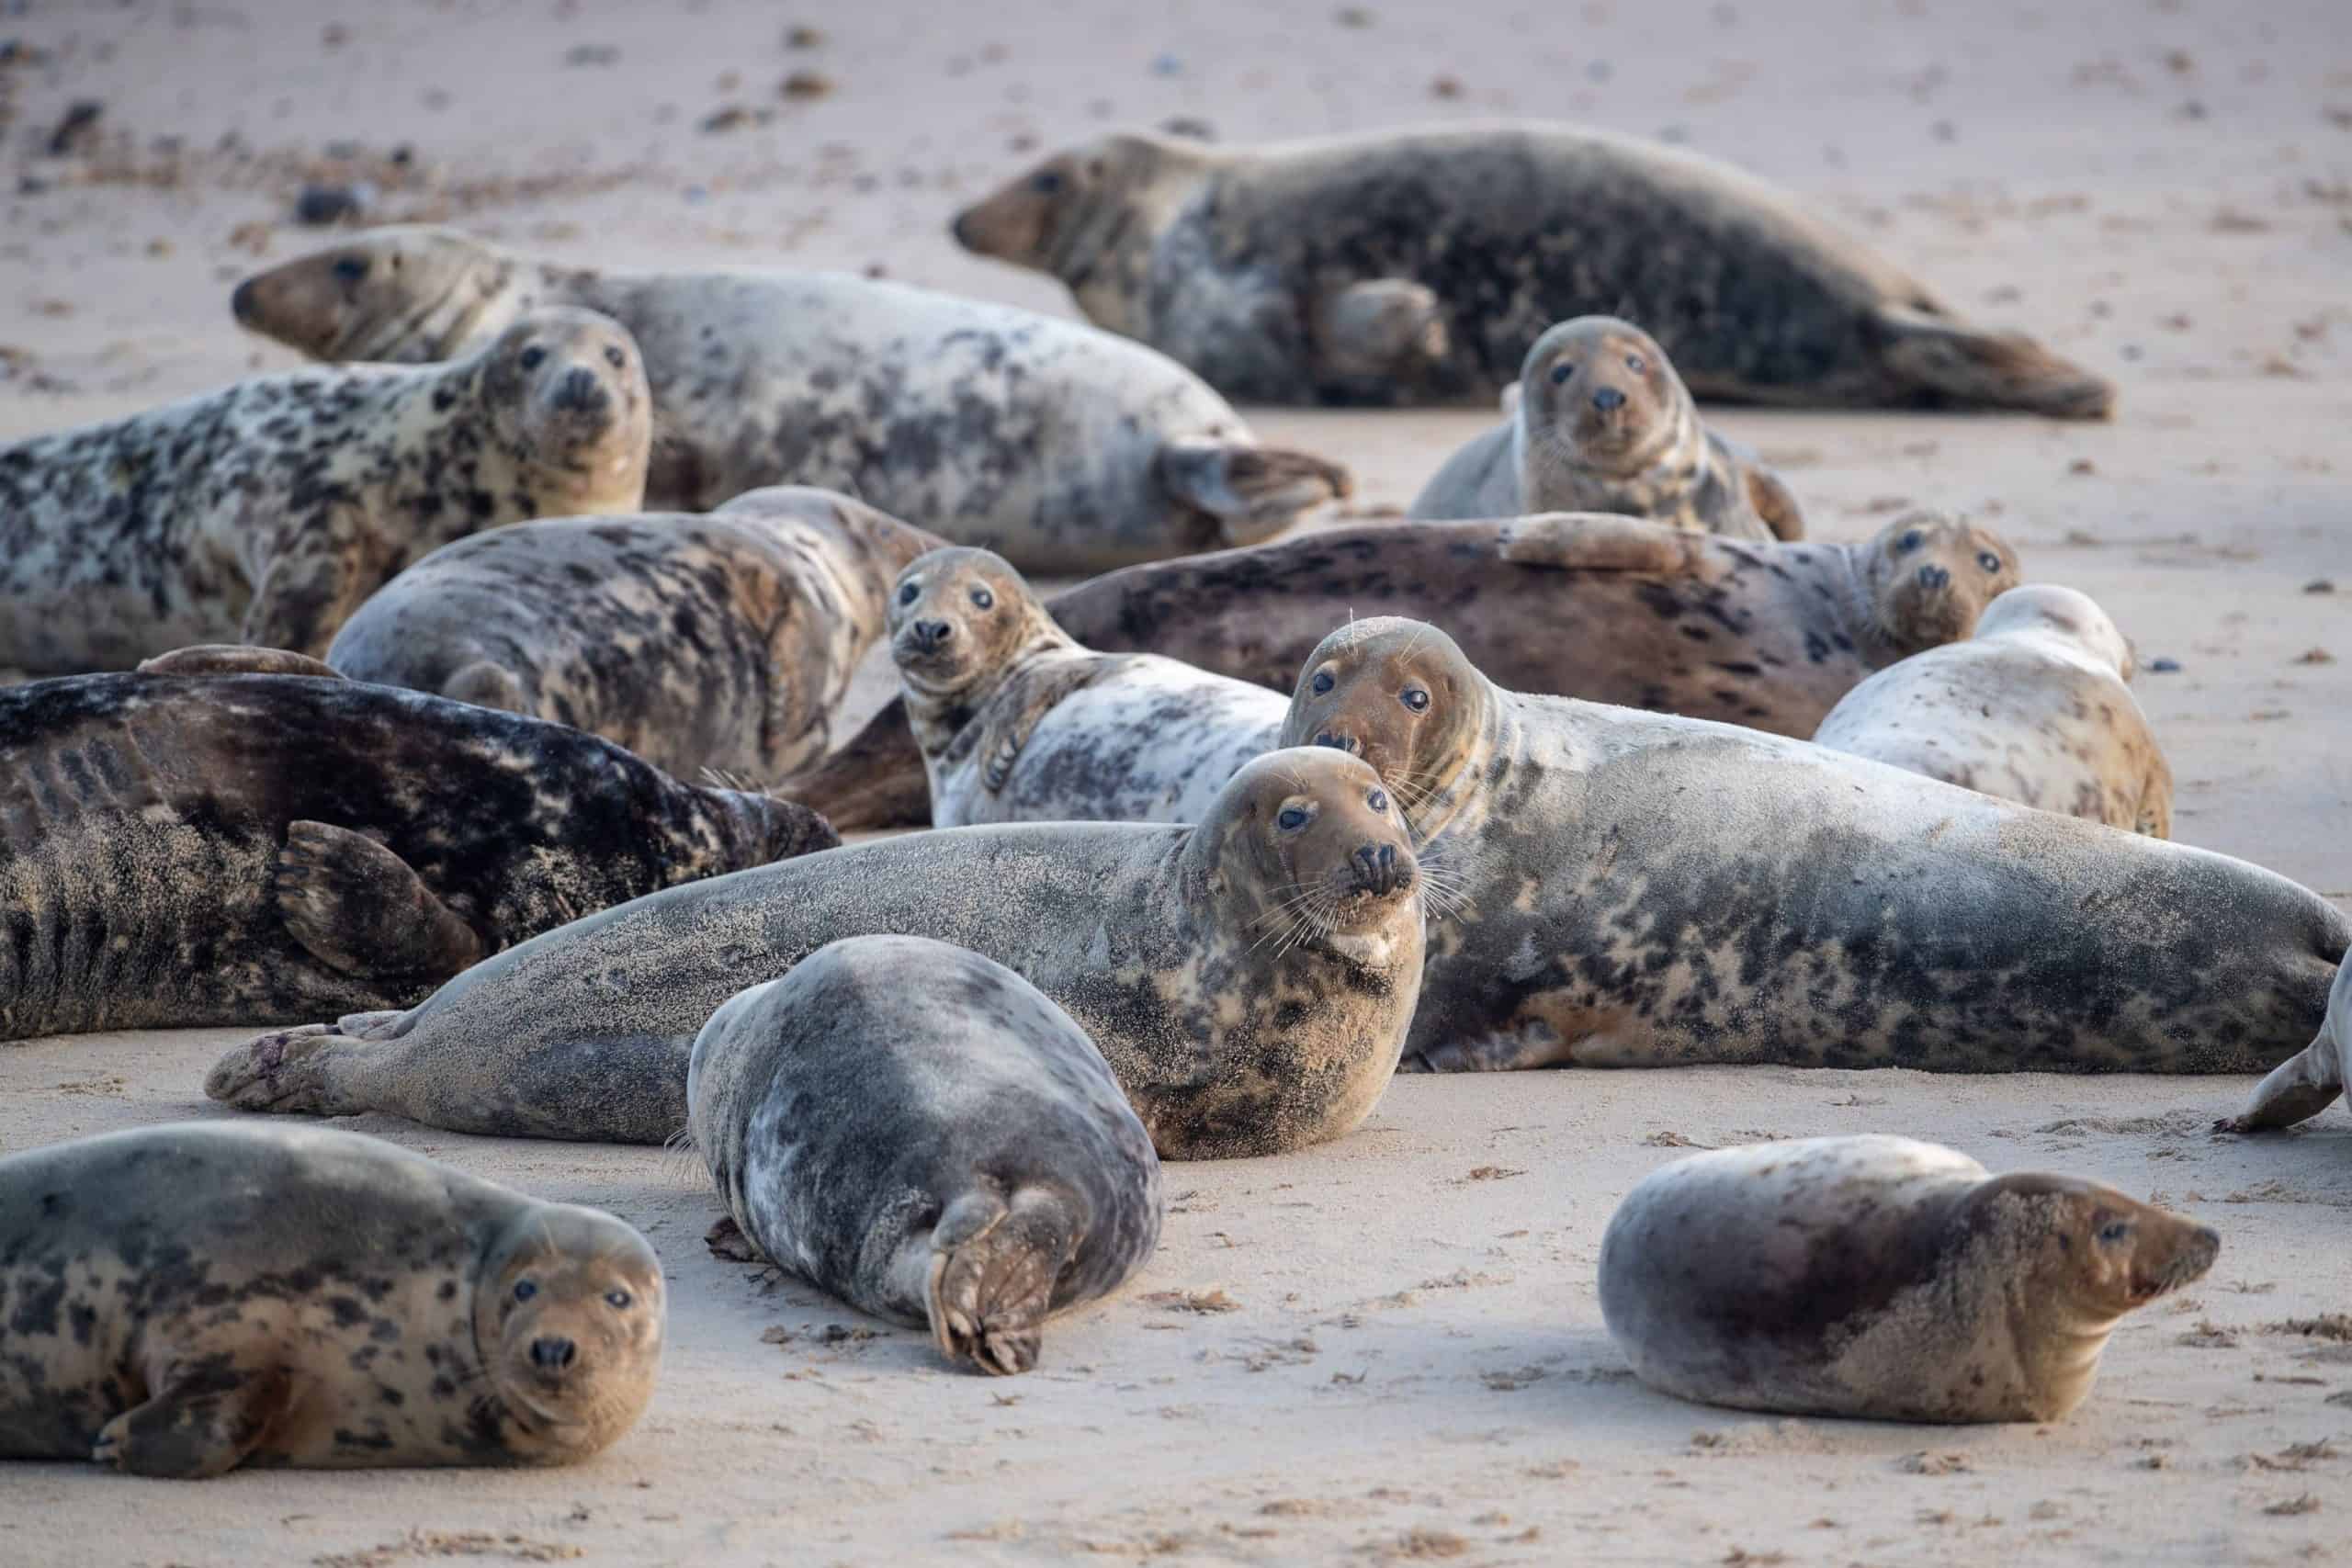 After deadly dog attack near Thames, coastal visitors urged to give seals space